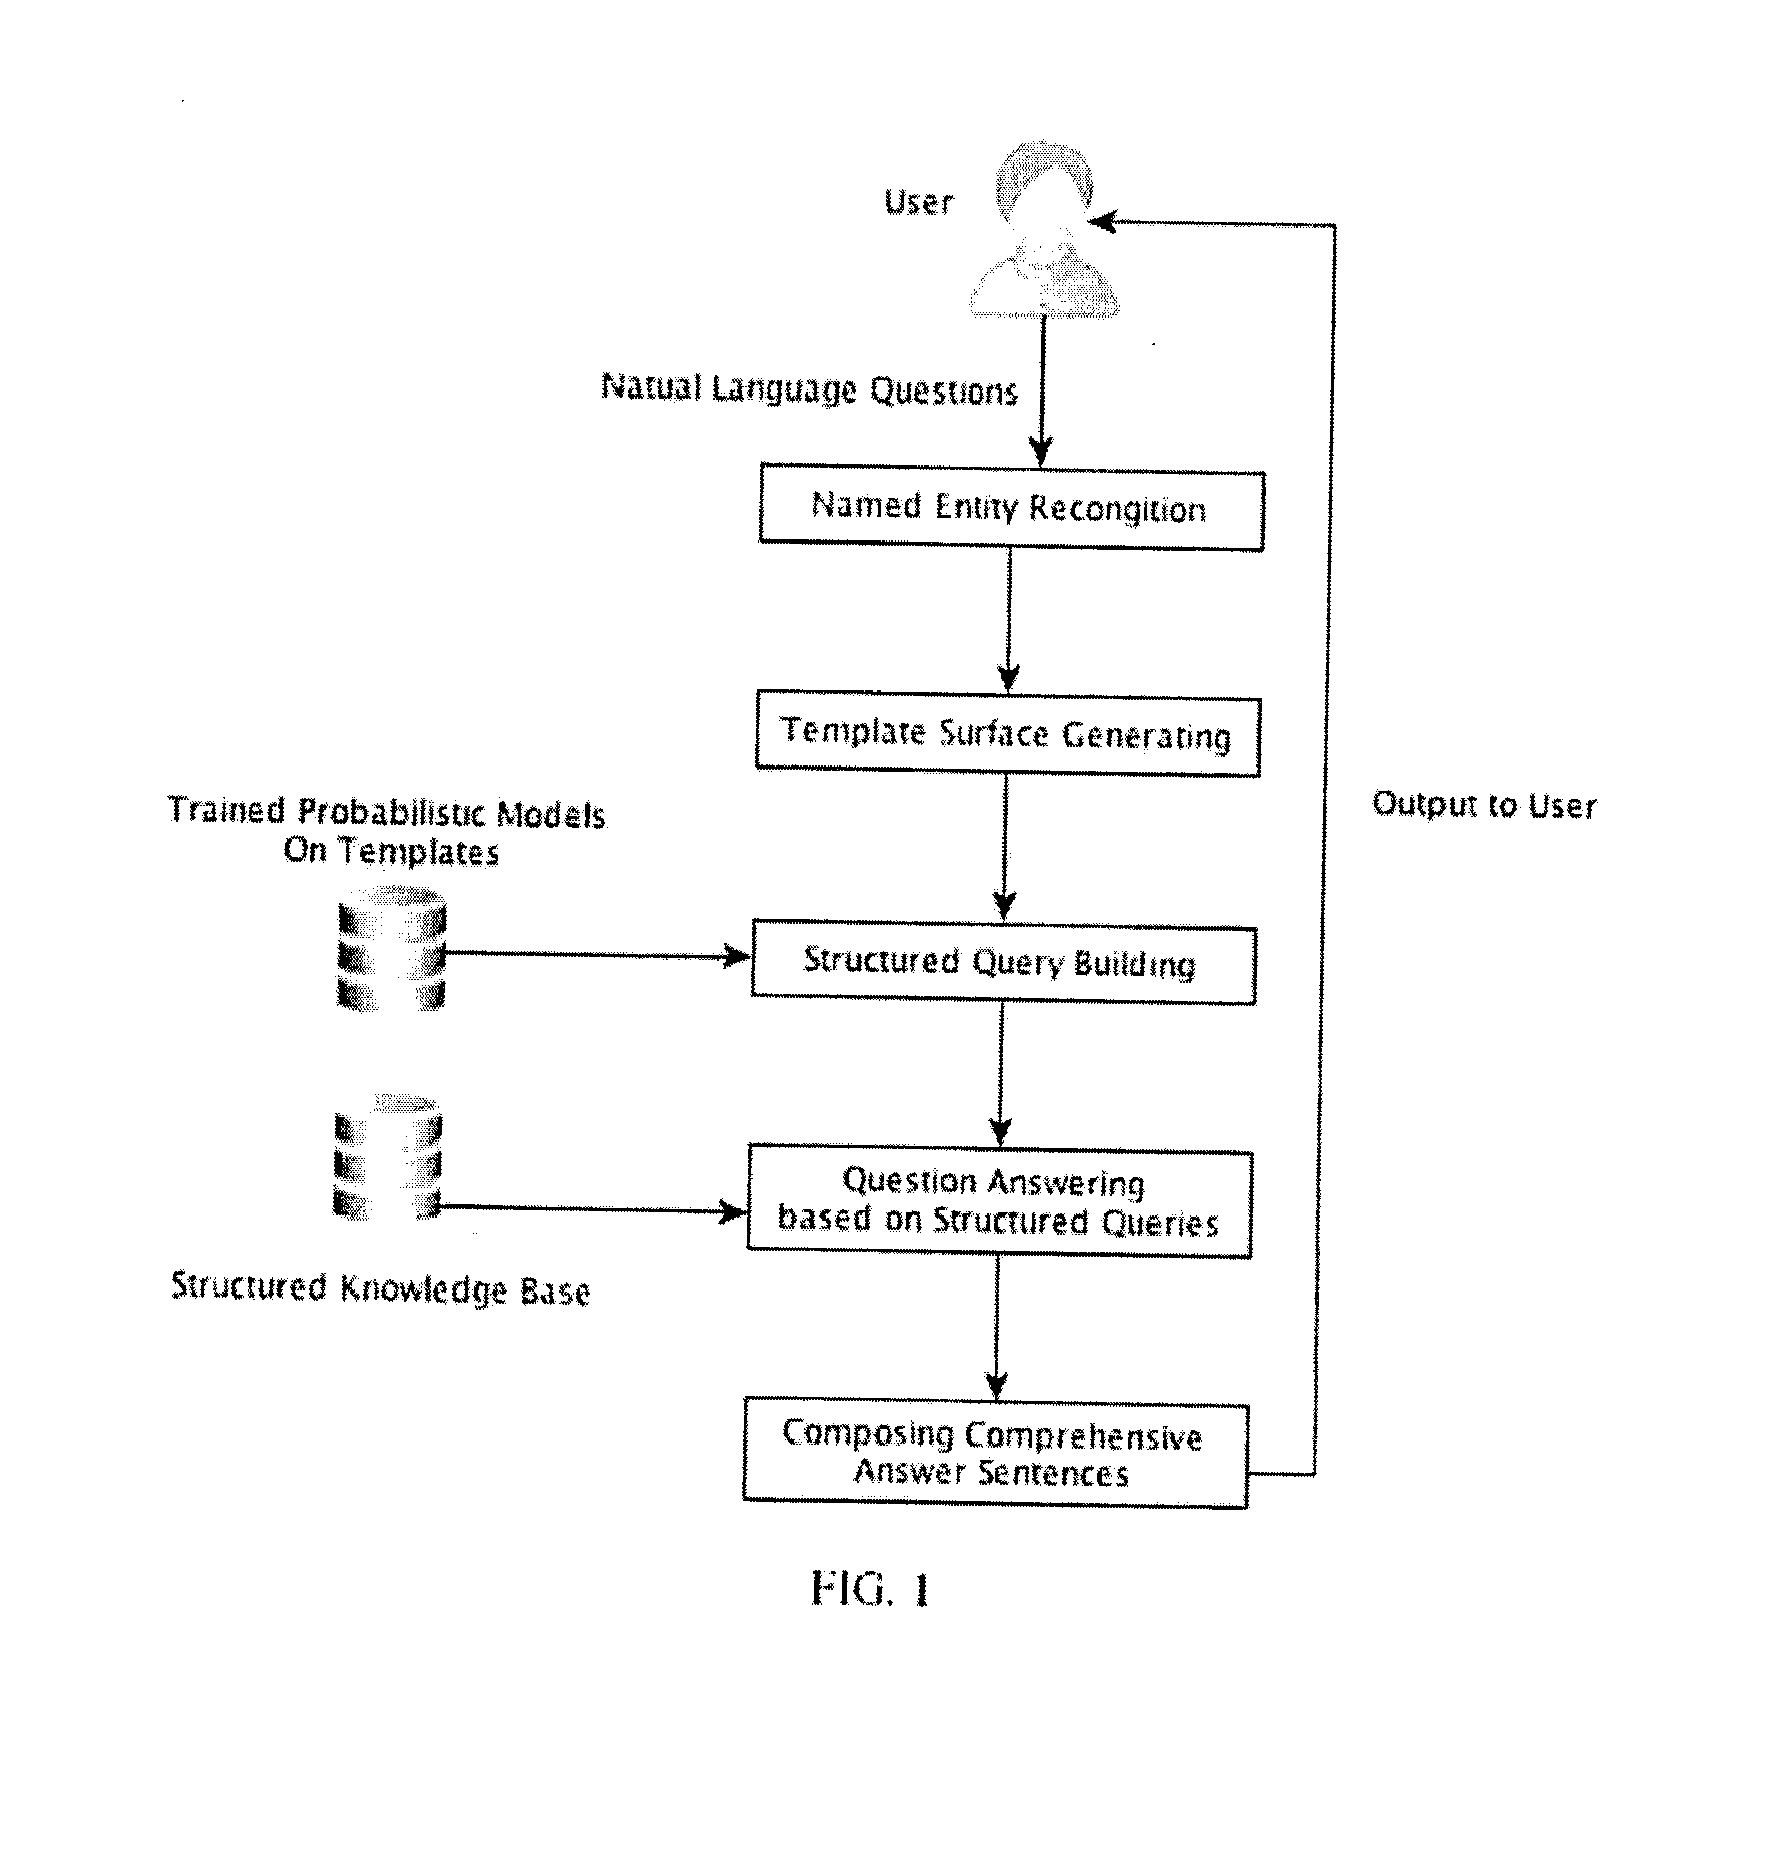 System and Method for Universal Translating From Natural Language Questions to Structured Queries